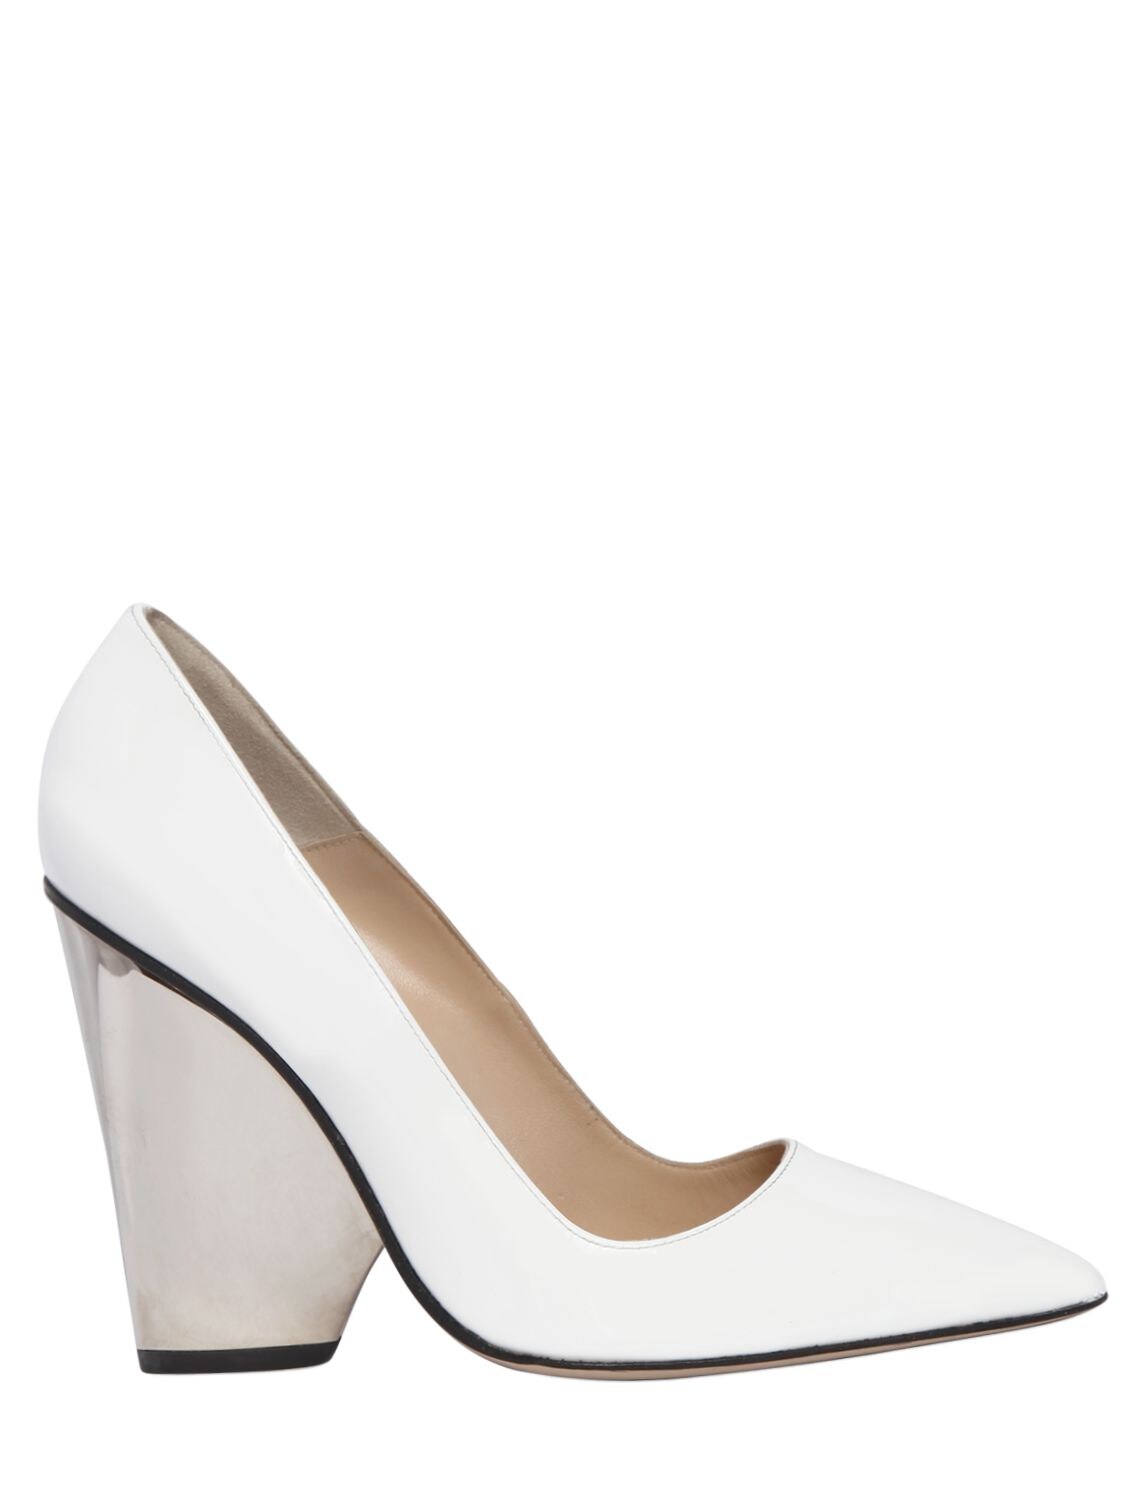 Paul Andrew 105mm Lotta Patent Leather Pumps In White